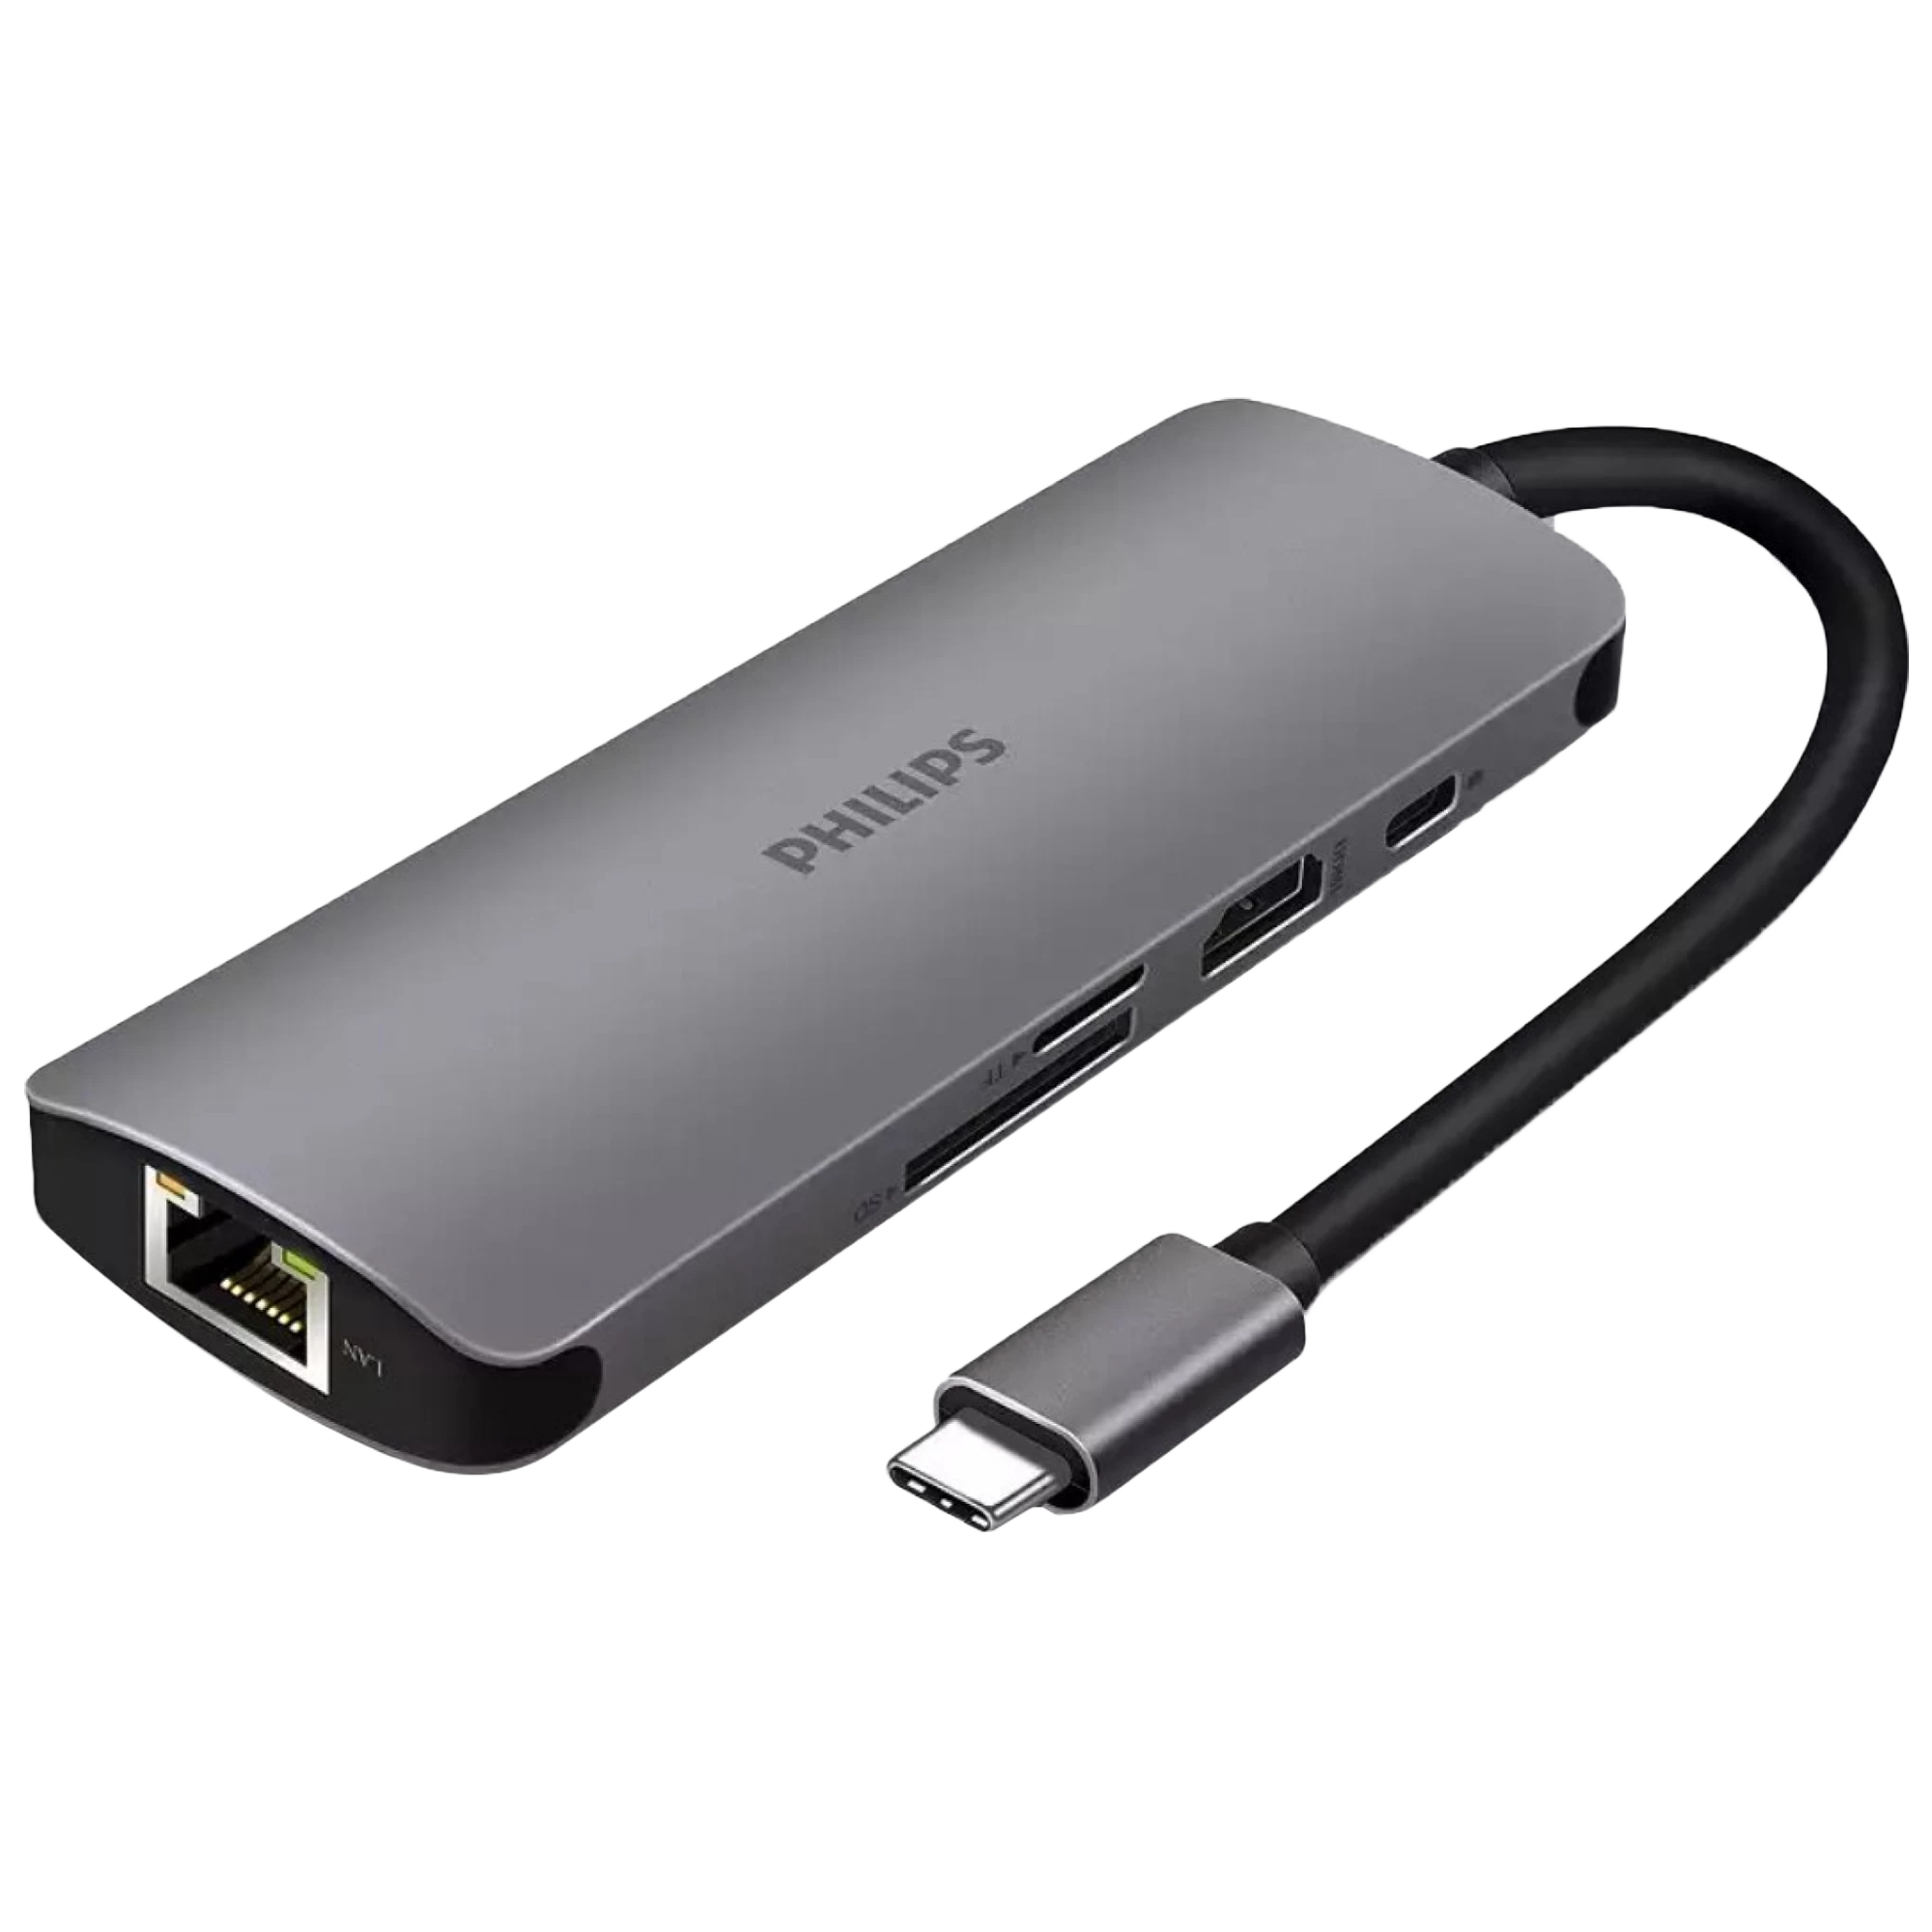 Philips 8-in-1 USB 3.0 Type C to RJ45, USB 3.0 Type A, USB 3.0 Type C, HDMI Type A, SD Card Slot, TF Card Reader USB Hub (5 Gbps Data Transfer Rate, Grey)